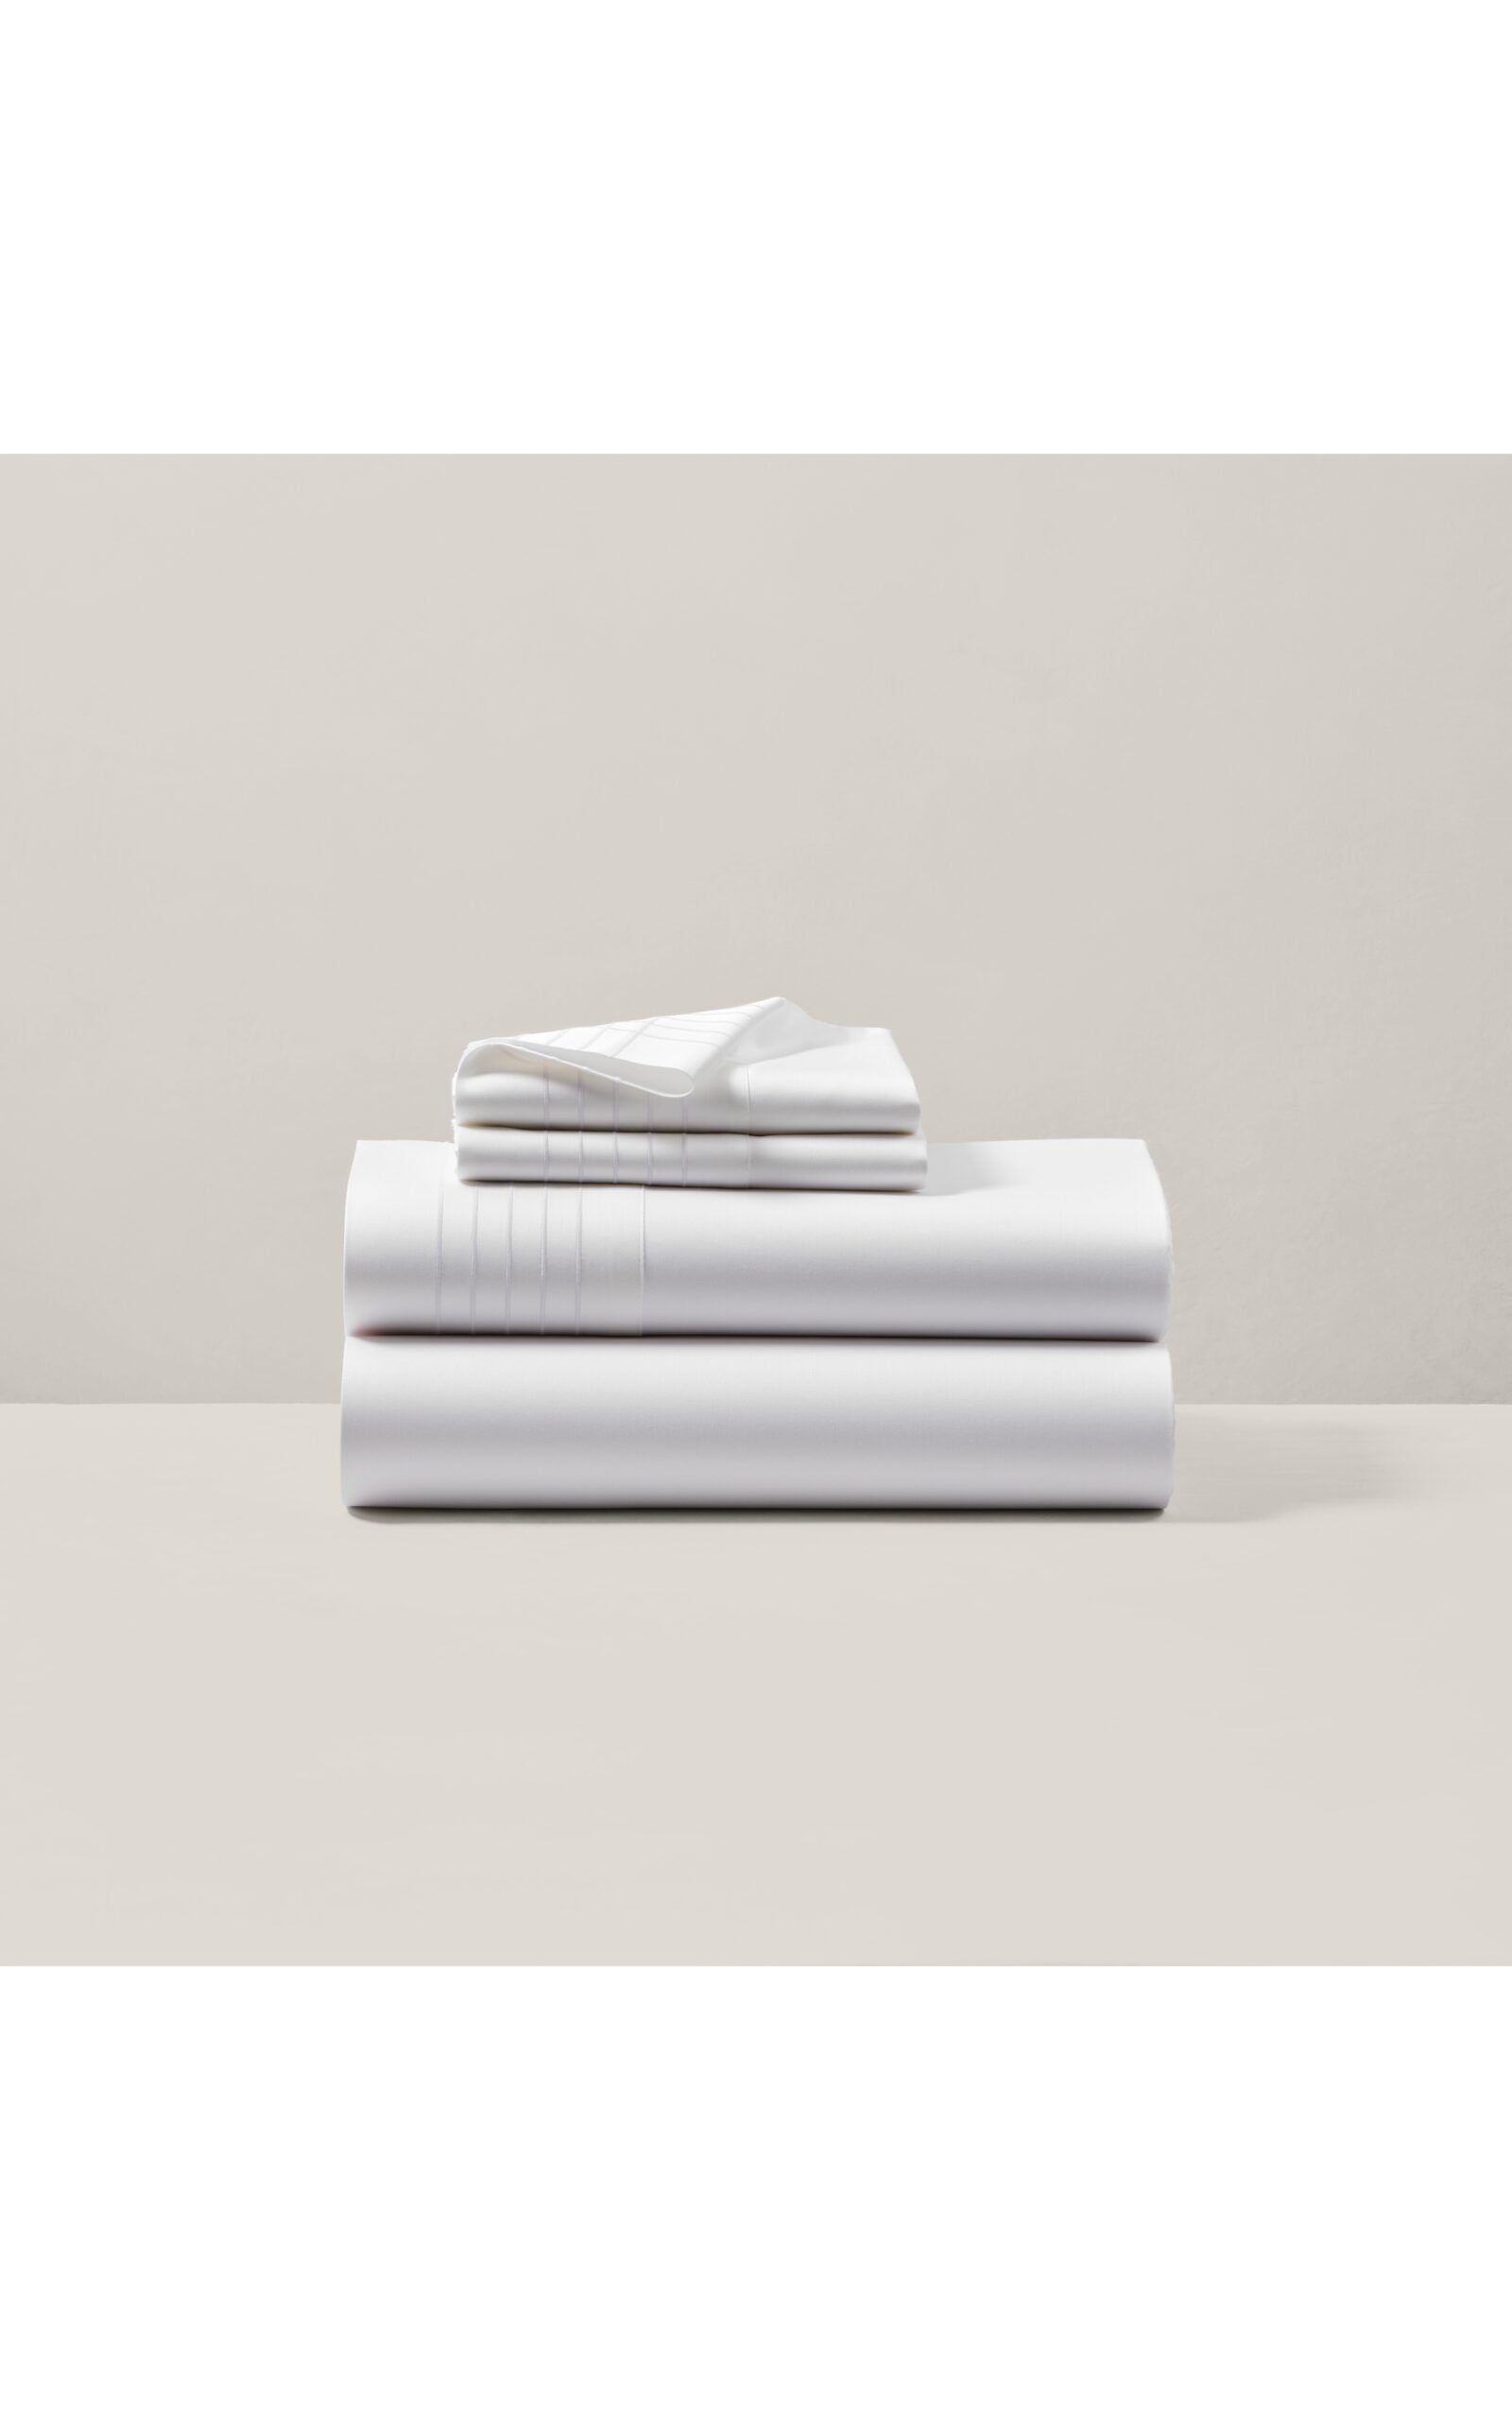 The Answer to a Lifelong Question: What Is a Good Thread Count for Sheets?